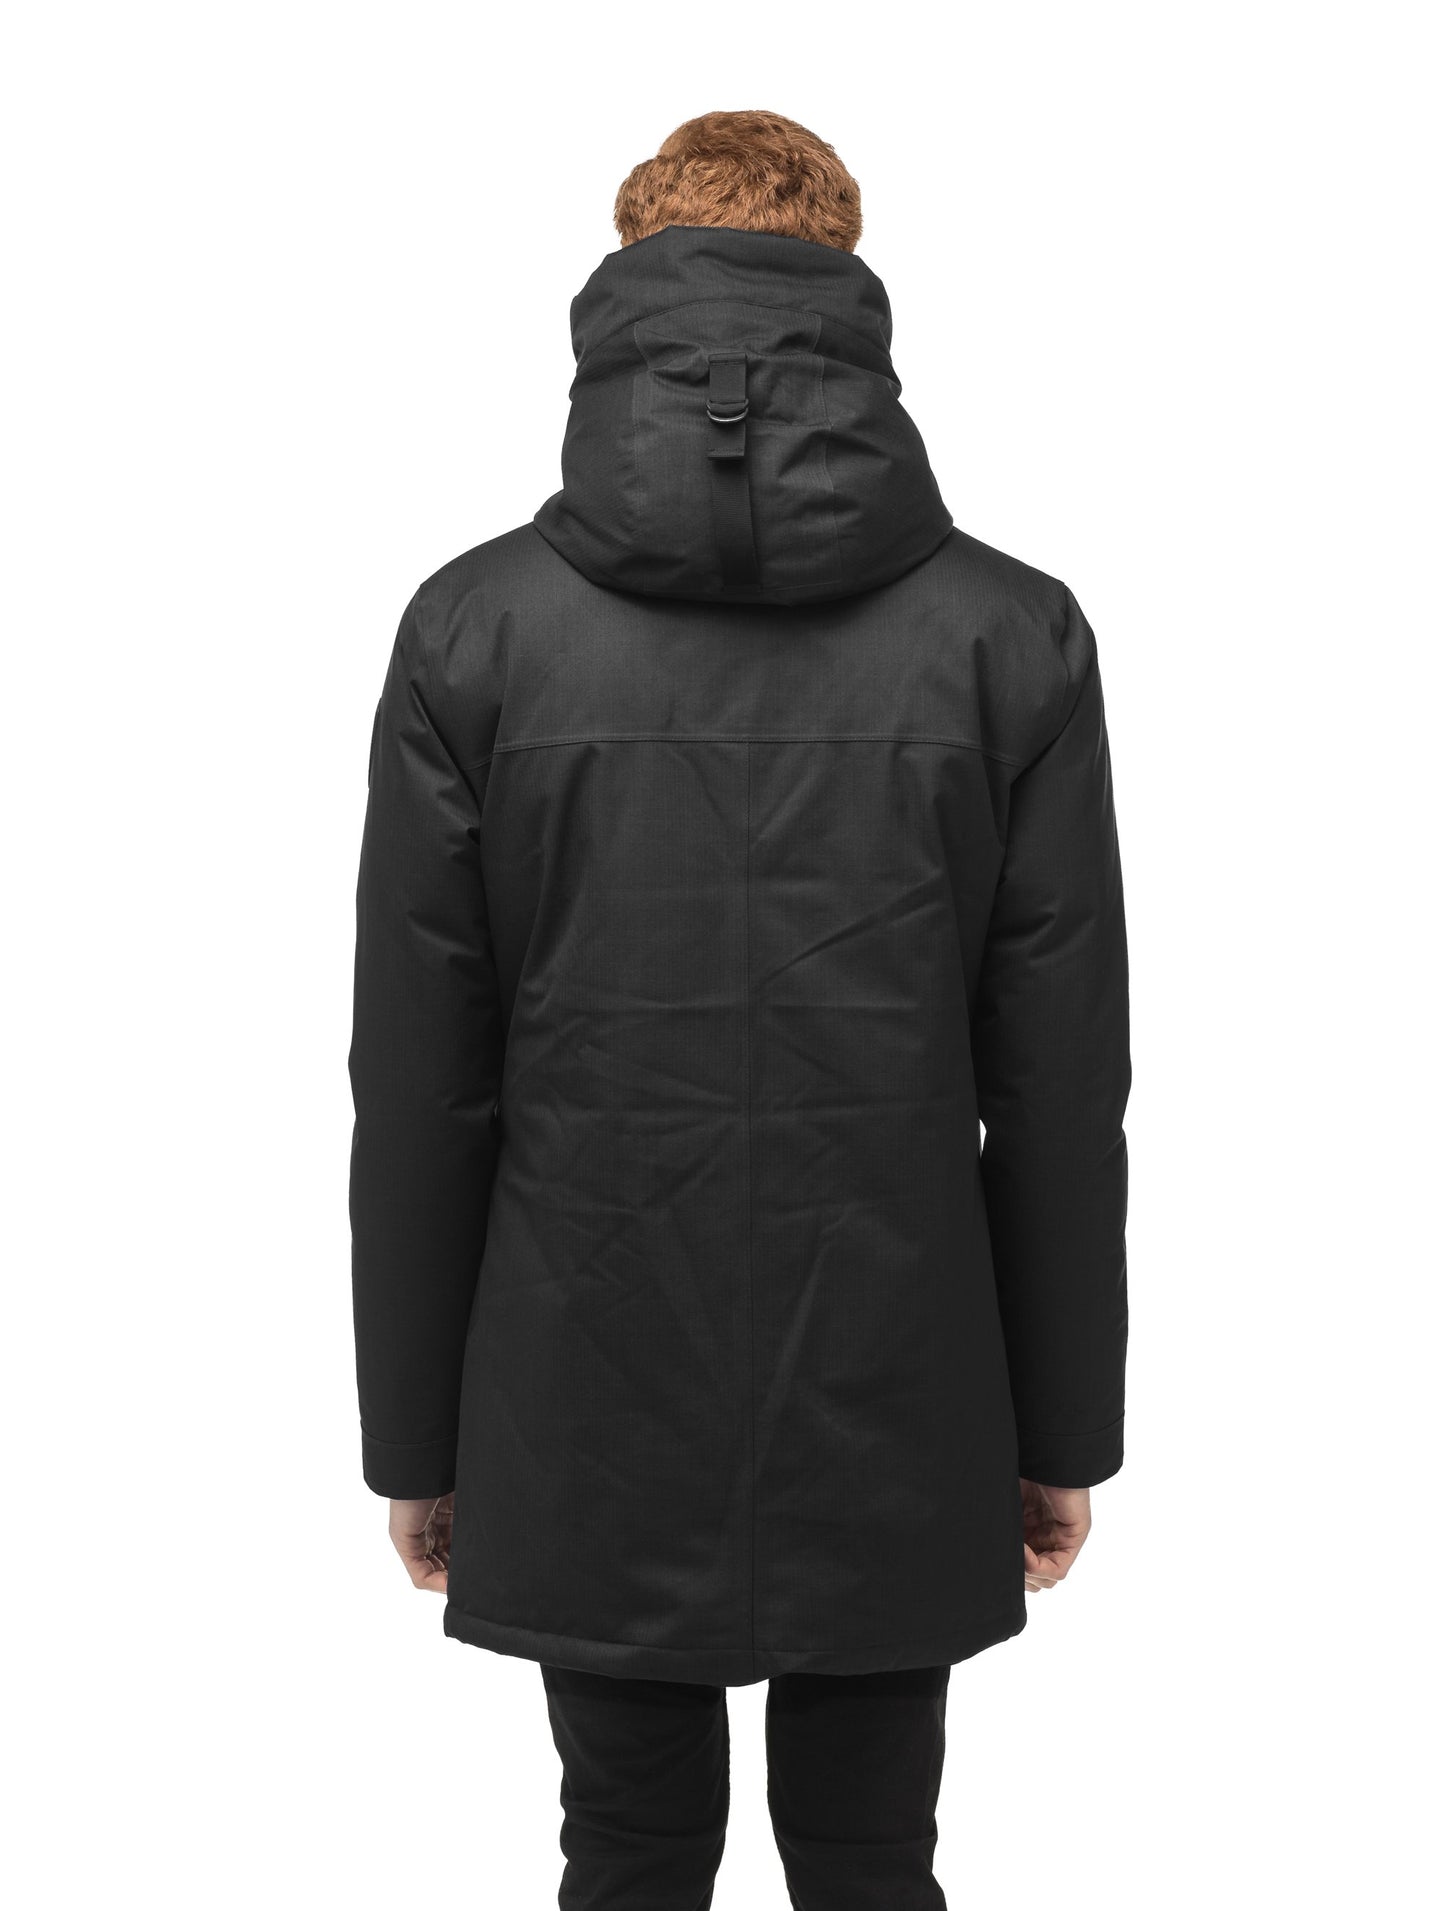 Pierre Men's Jacket in thigh length, Canadian white duck down insulation, non-removable down-filled hood, angled waist pockets, centre-front zipper with wind flap, and elastic ribbed cuffs, in CH Black